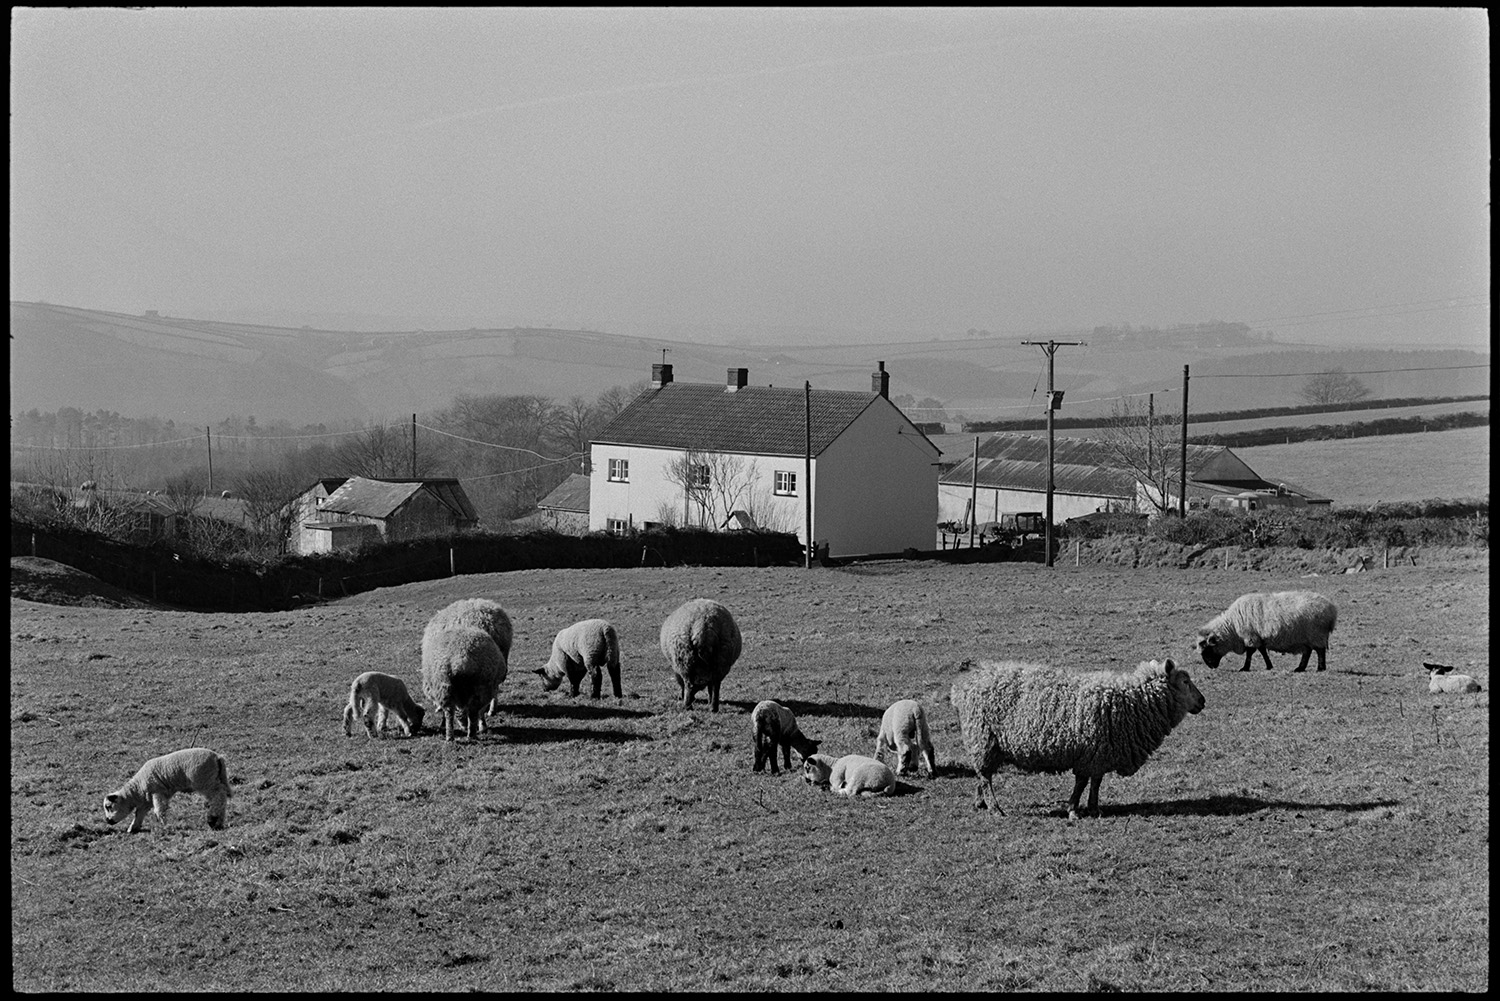 Farmhouse with sheep, farmers wife with lambs in garden. 
[Sheep and lambs grazing in a field at Jeffrys, Beaford, also known as Mill Road Farm. The farmhouse and barns can be seen in the background.]